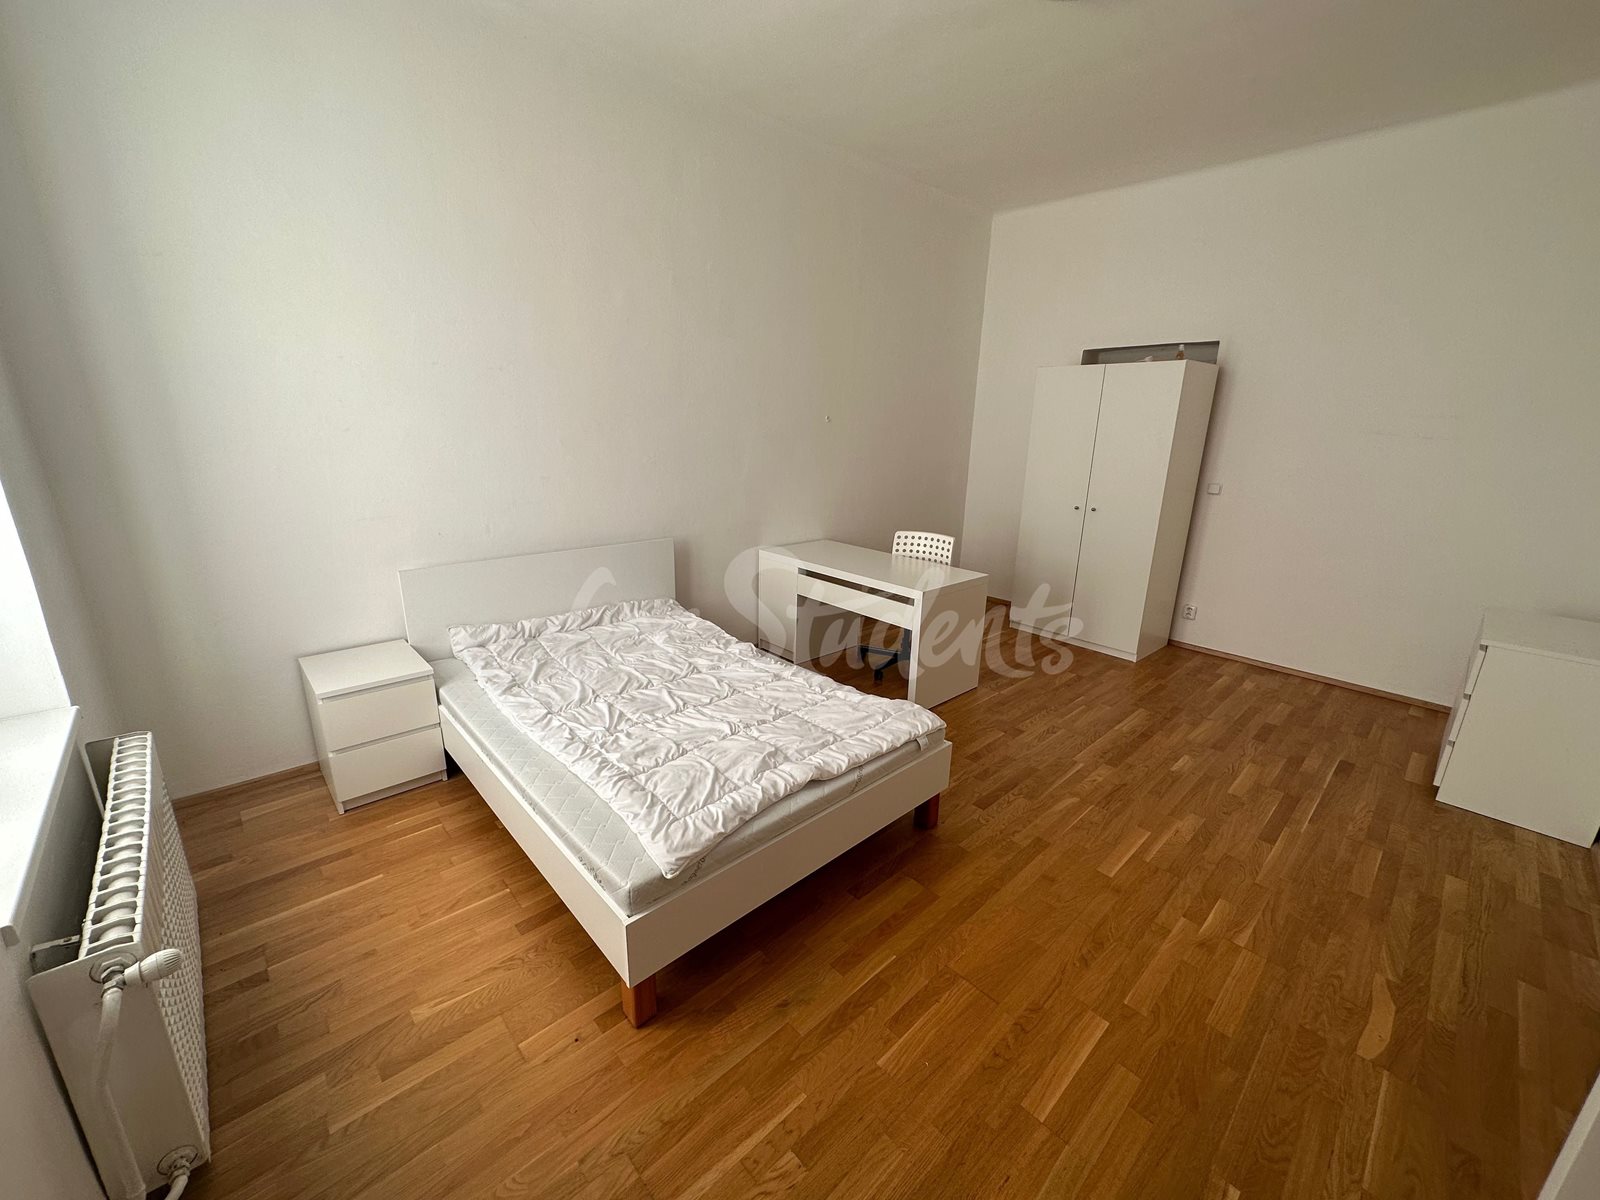 One room in three bedroom available in male 3bedroom apartment in a student's house in the center of town, Hradec Králové